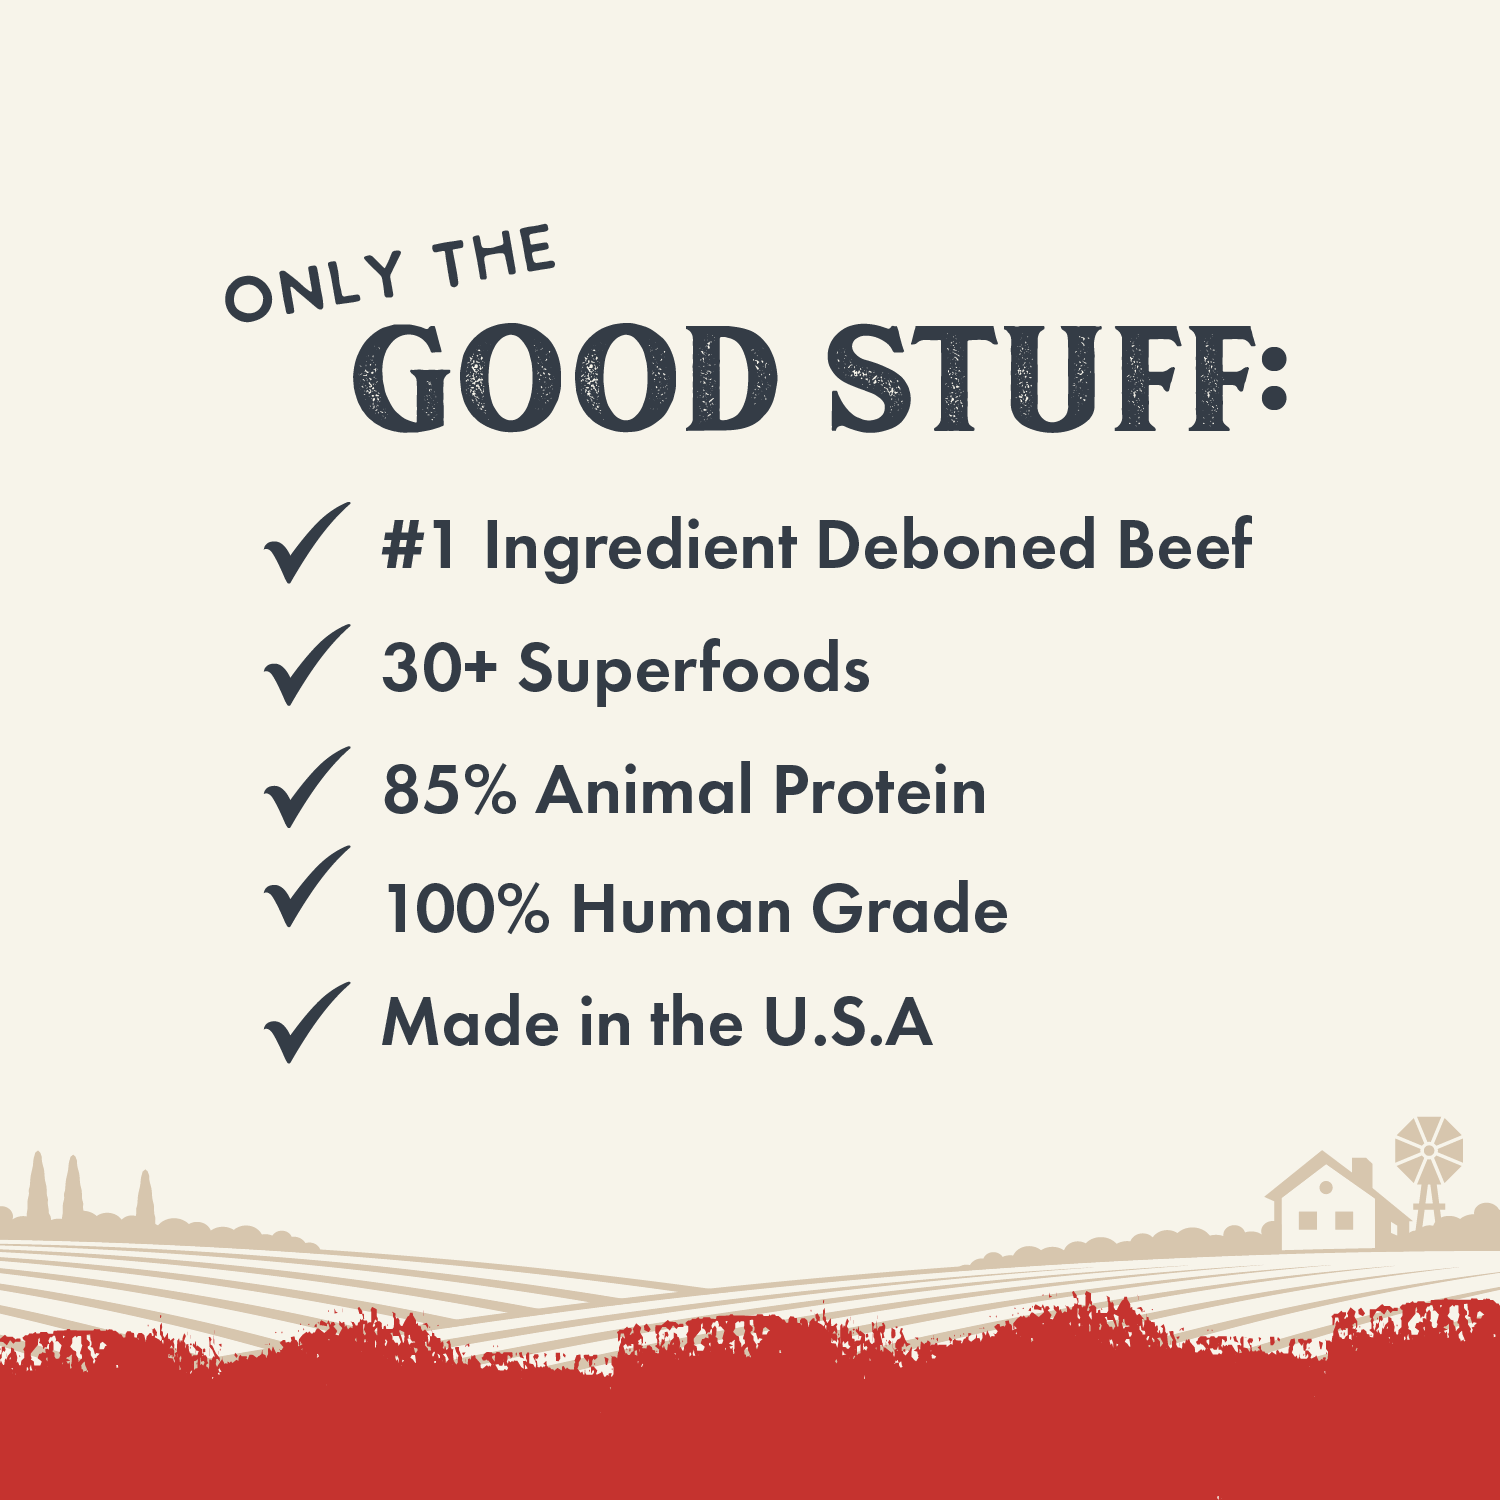 Infographic for Air Dried dog food listing benefits: #1 Ingredient beef over 30 Superfoods, 85% Animal Protein, 100% Human Grade, and Made in the U.S.A.